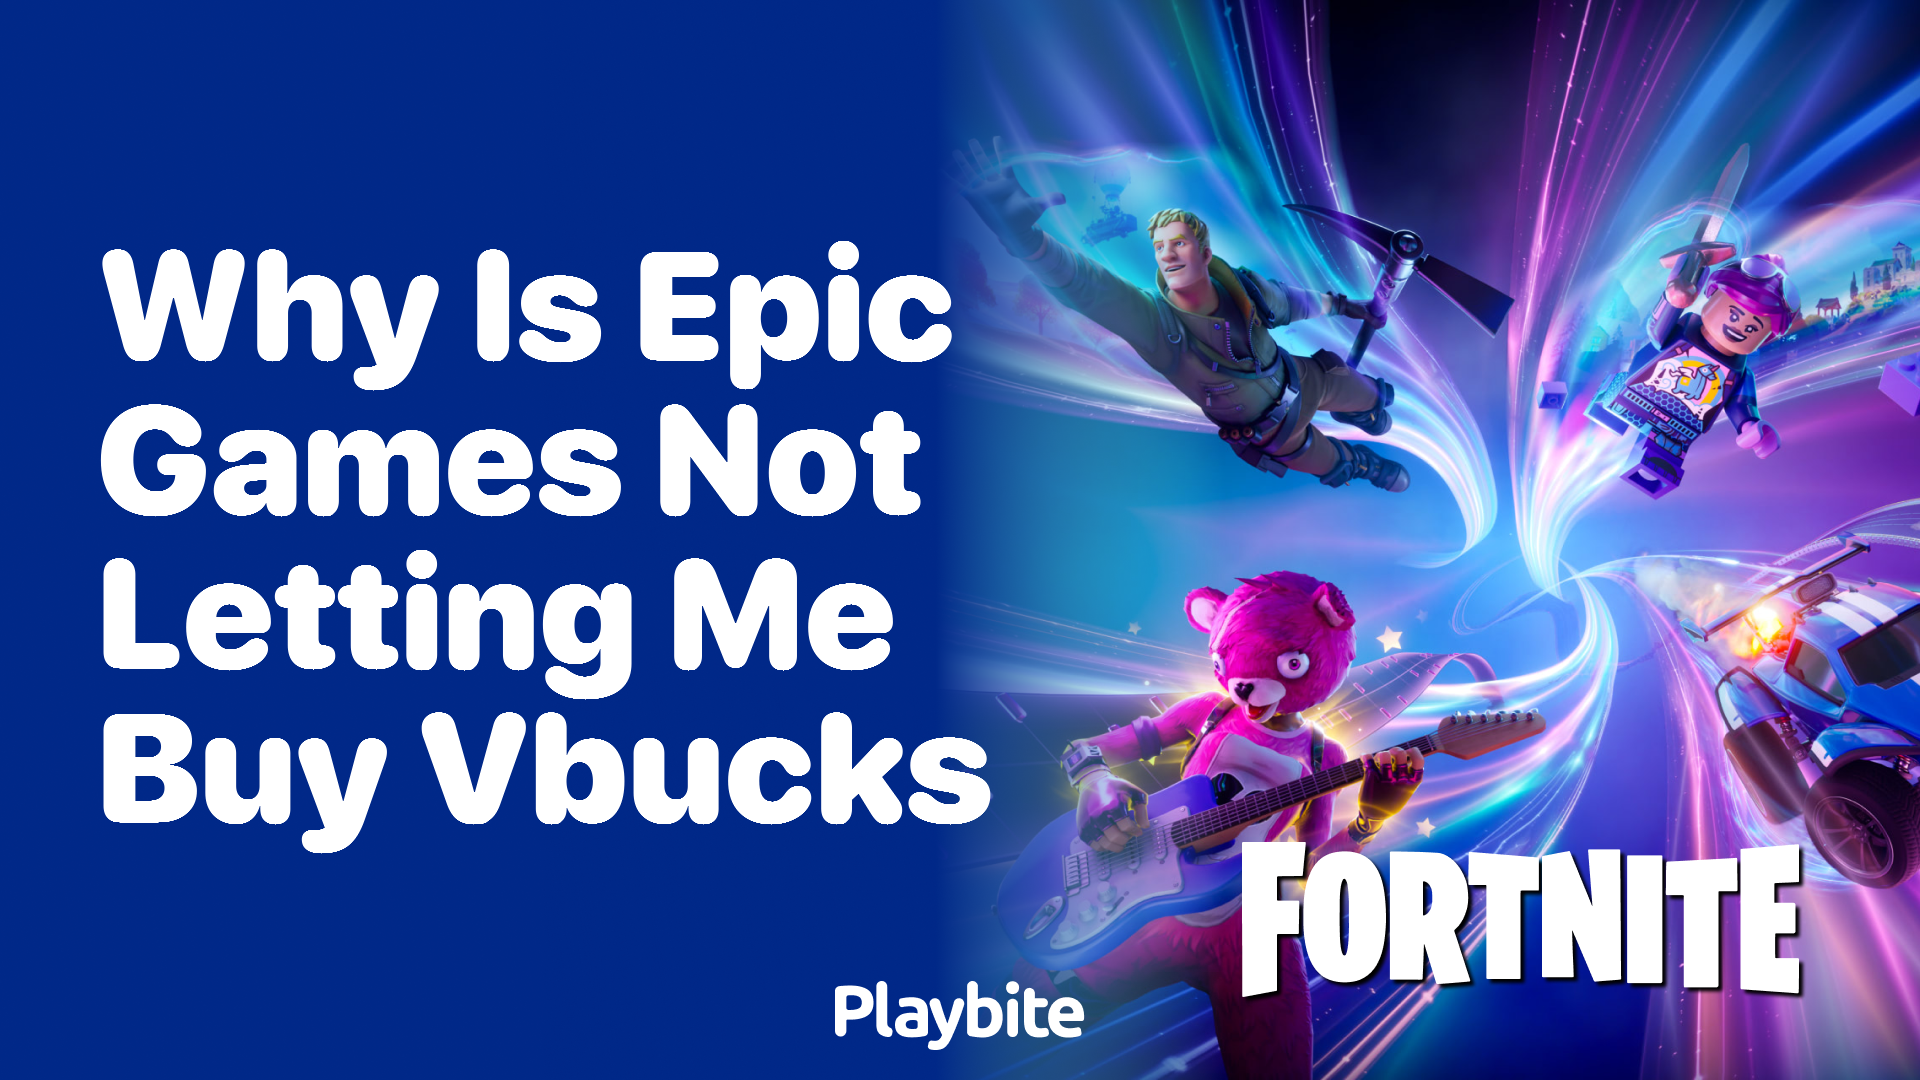 Why Is Epic Games Not Letting Me Buy V-Bucks?